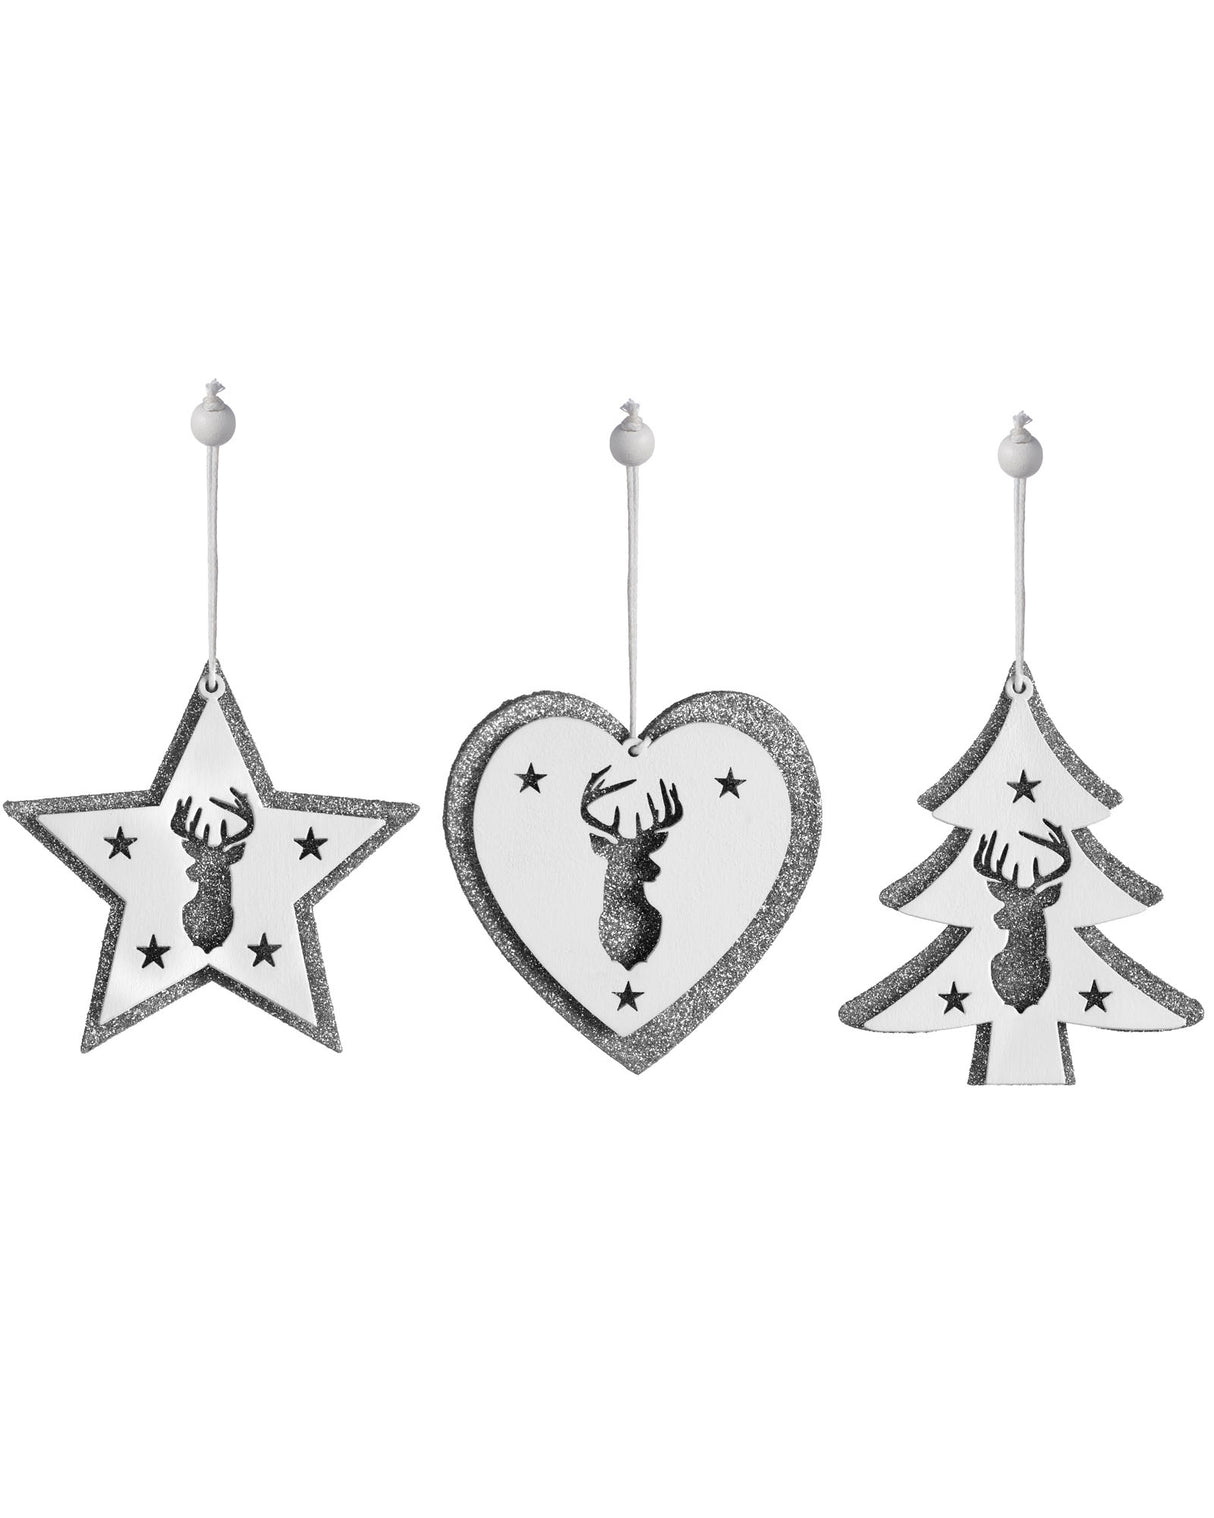 Set of 6 Hanging Christmas Decorations 9cm, Silver